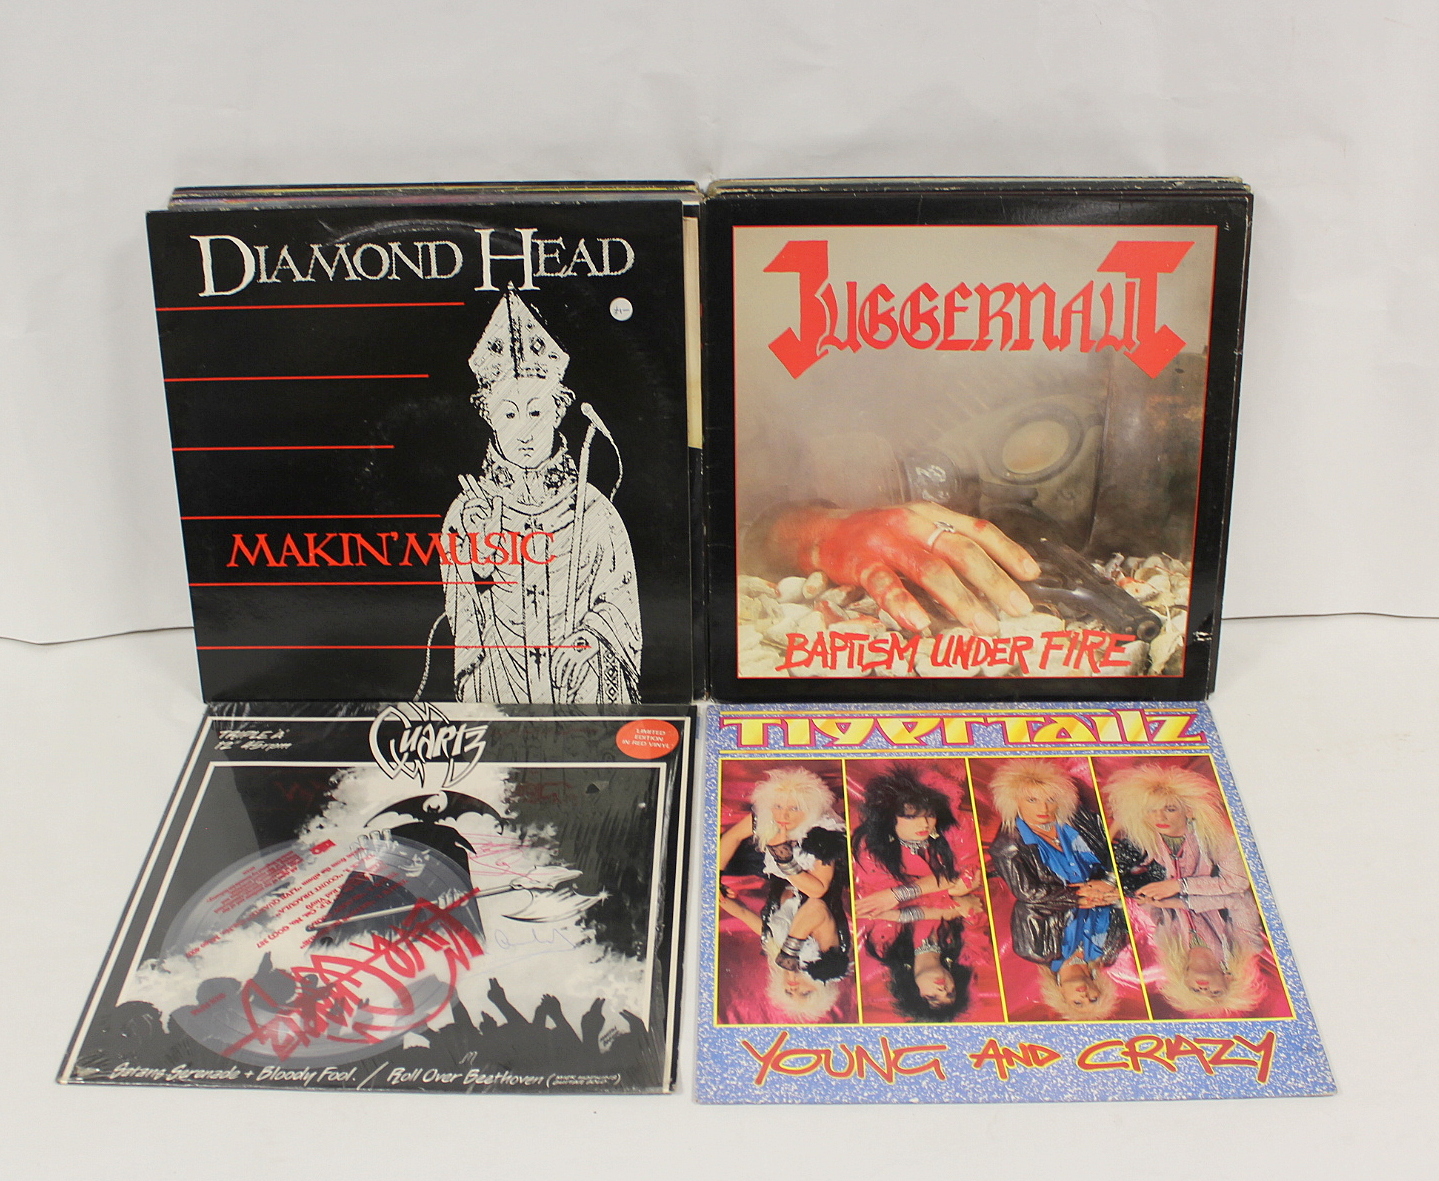 Collection of NWOBHM LPs etc to include Juggernaut, 2 x Quartz 'AAA', on red vinyl (one of which has